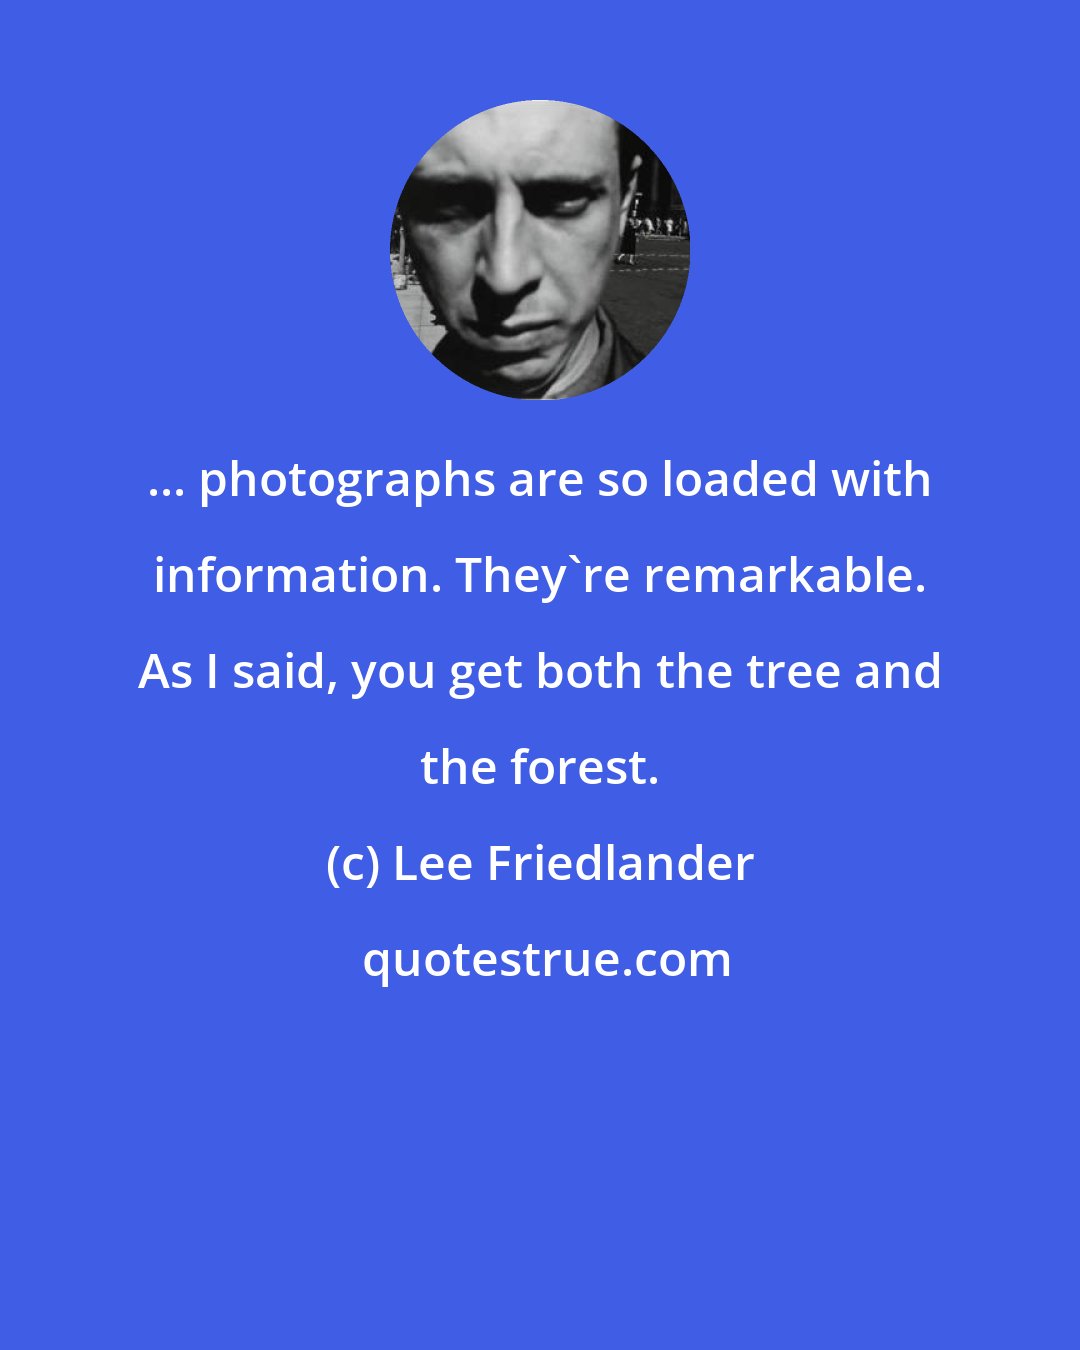 Lee Friedlander: ... photographs are so loaded with information. They're remarkable. As I said, you get both the tree and the forest.